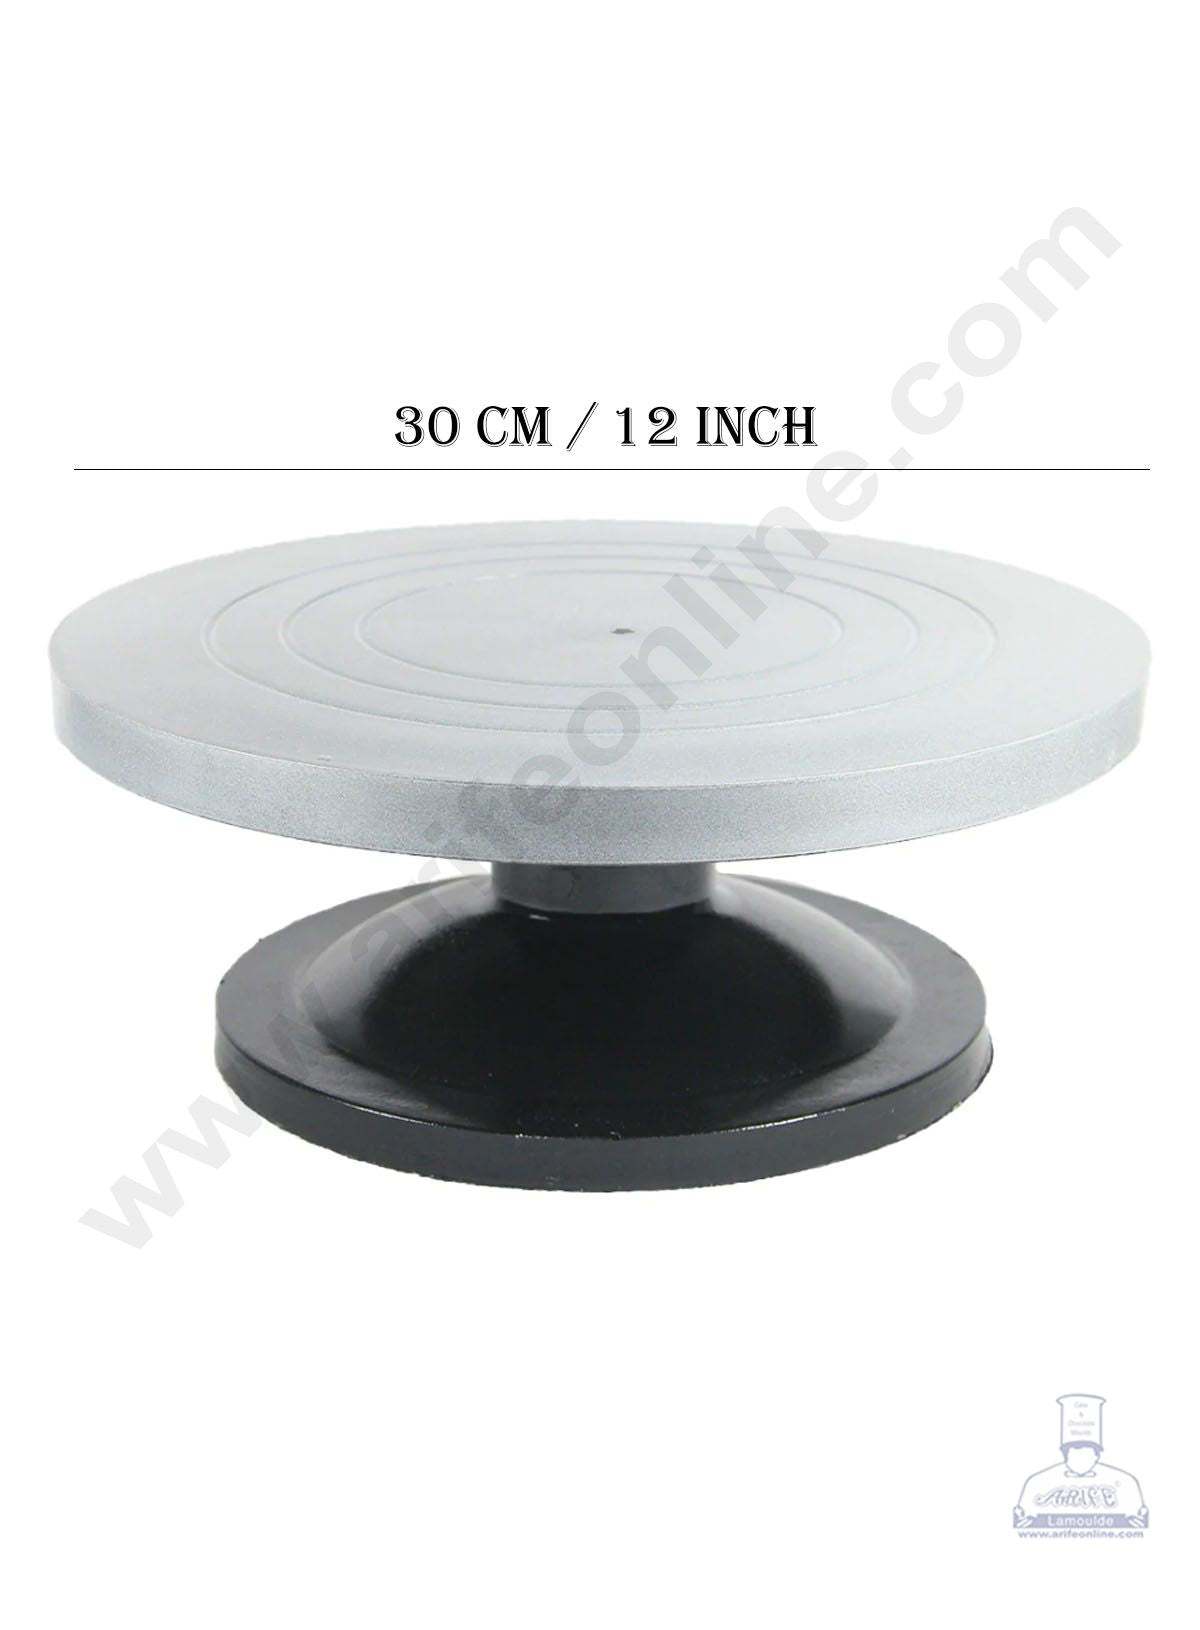  Black Marble Revolving Cake Turntable 12 Inchcake Rotating  Stand with Non-Slipping Abs Rubber Bottom for Cake,Cupcake Decorating  Supplies-Black 12 inch : Home & Kitchen